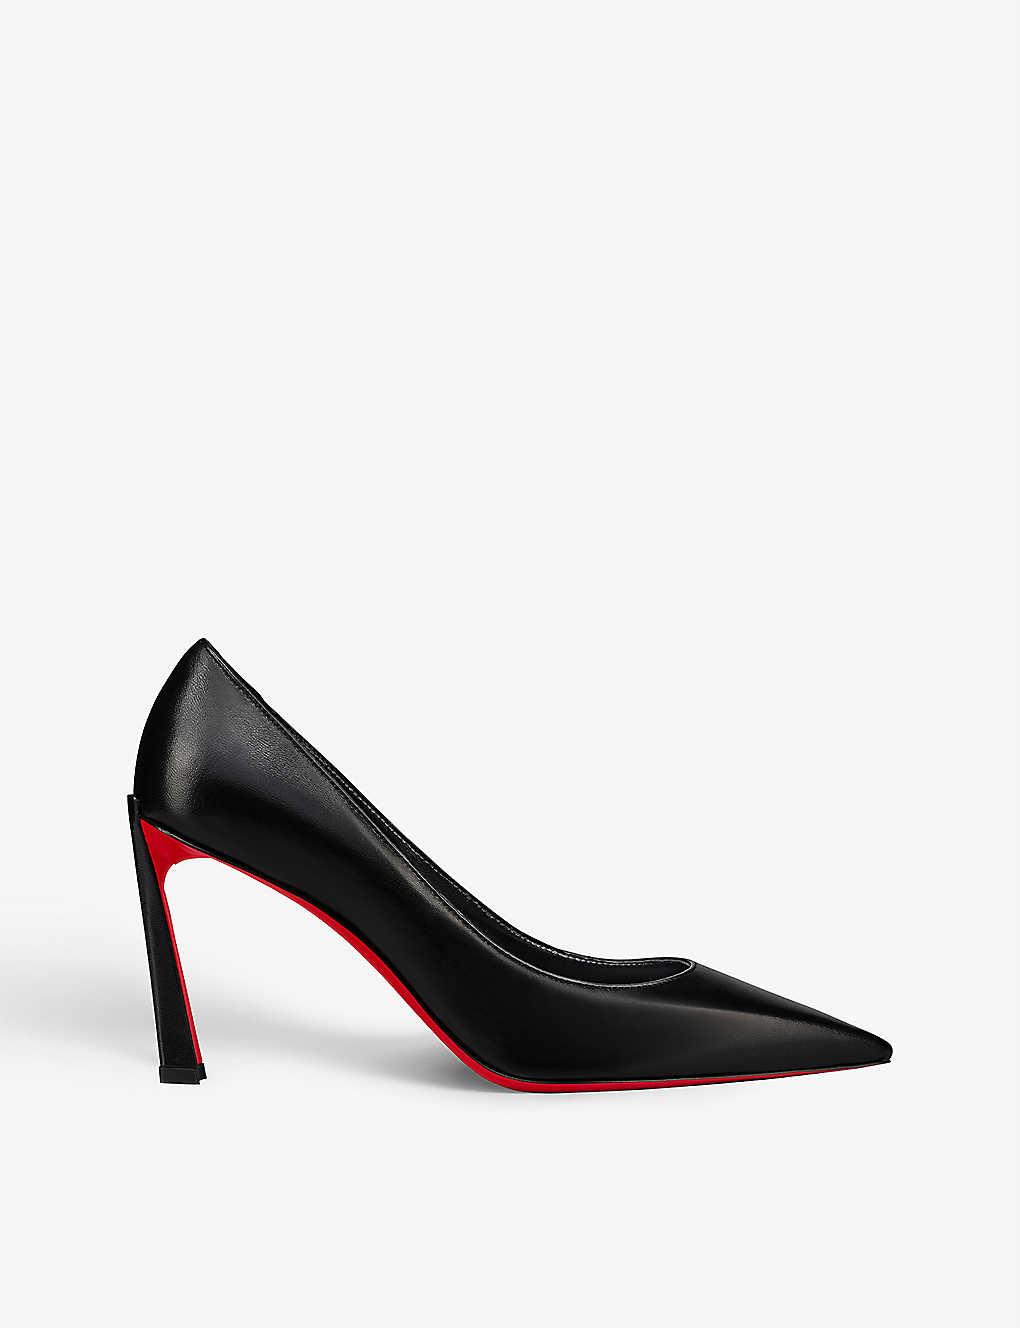 Christian Louboutin Condora 85 Leather Court Shoes in Black | Lyst